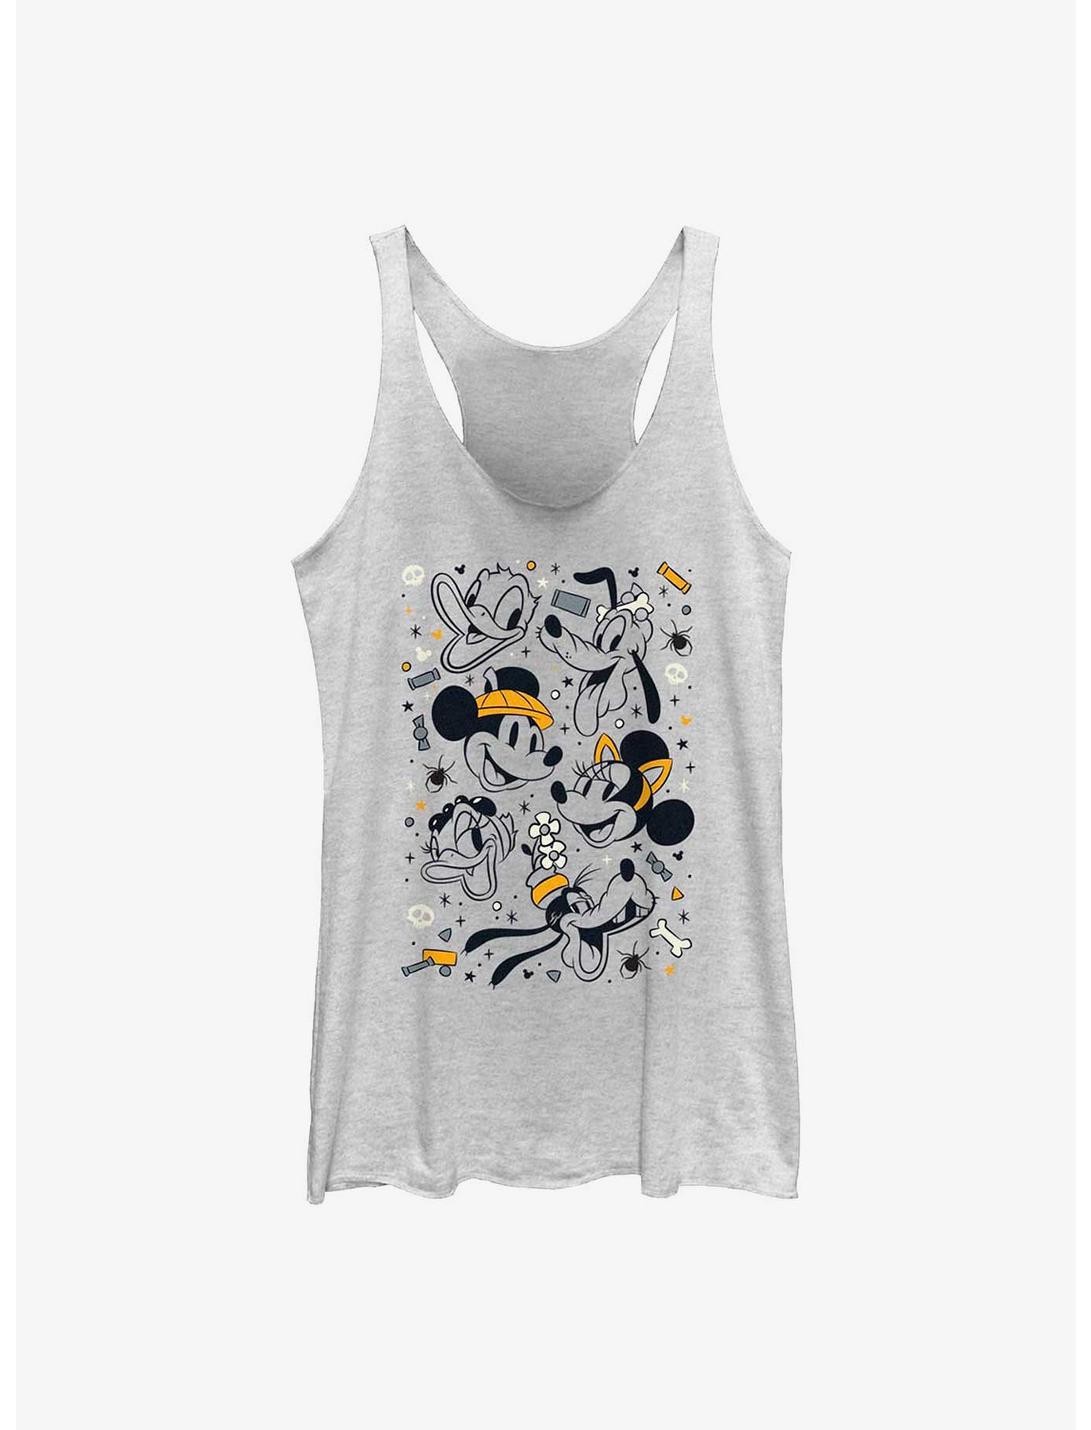 Disney Mickey Mouse & Friends Happiest Halloween Womens Tank Top, WHITE HTR, hi-res